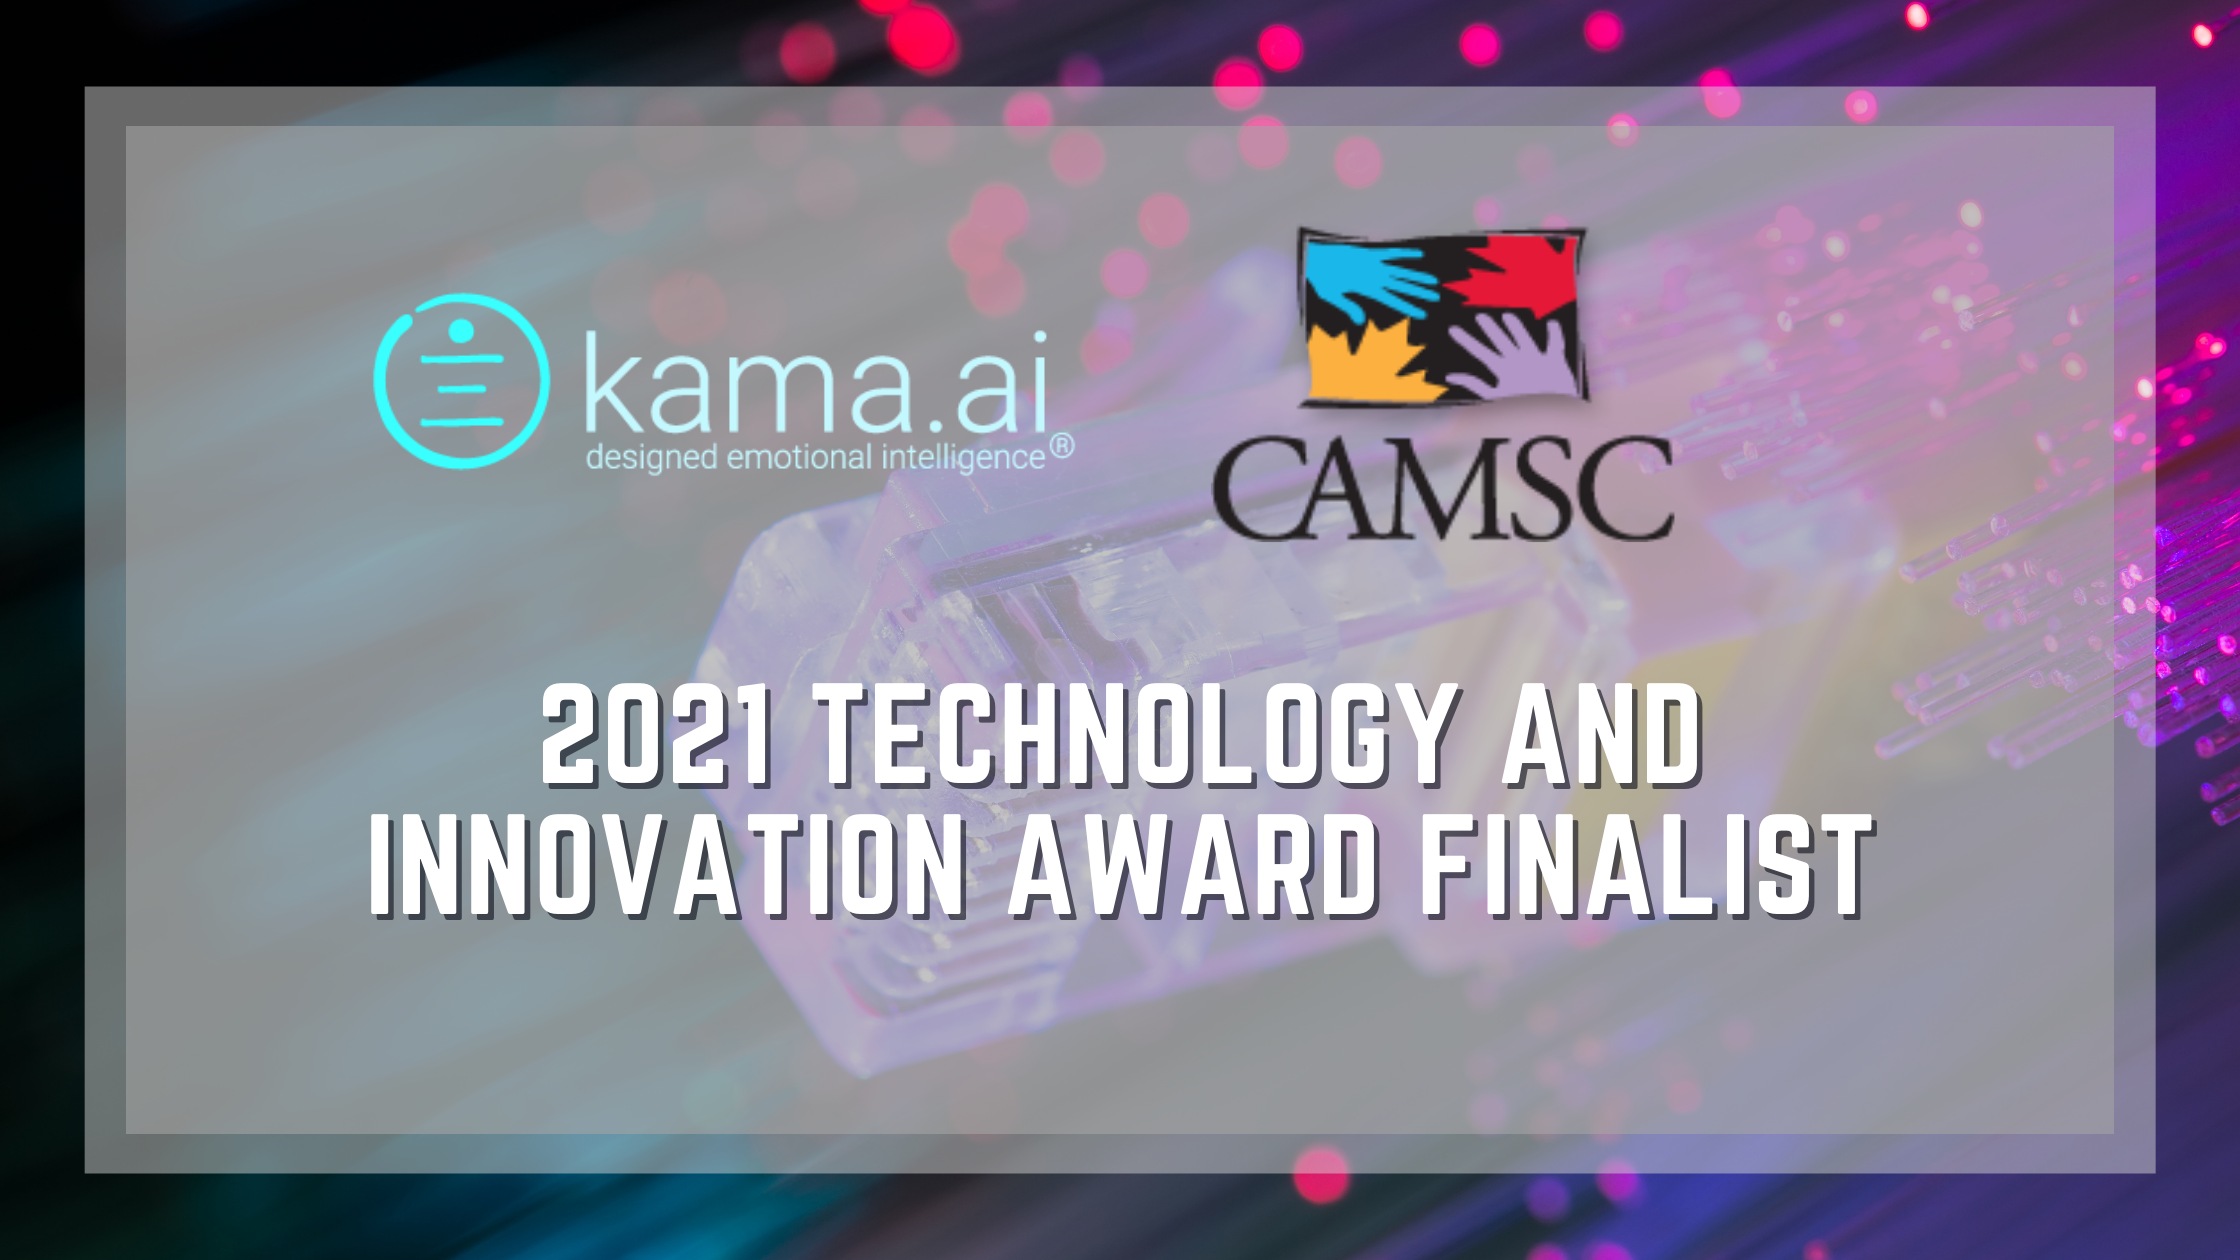 kama.ai Selected as Finalist for CAMSC Technology and Innovation Award